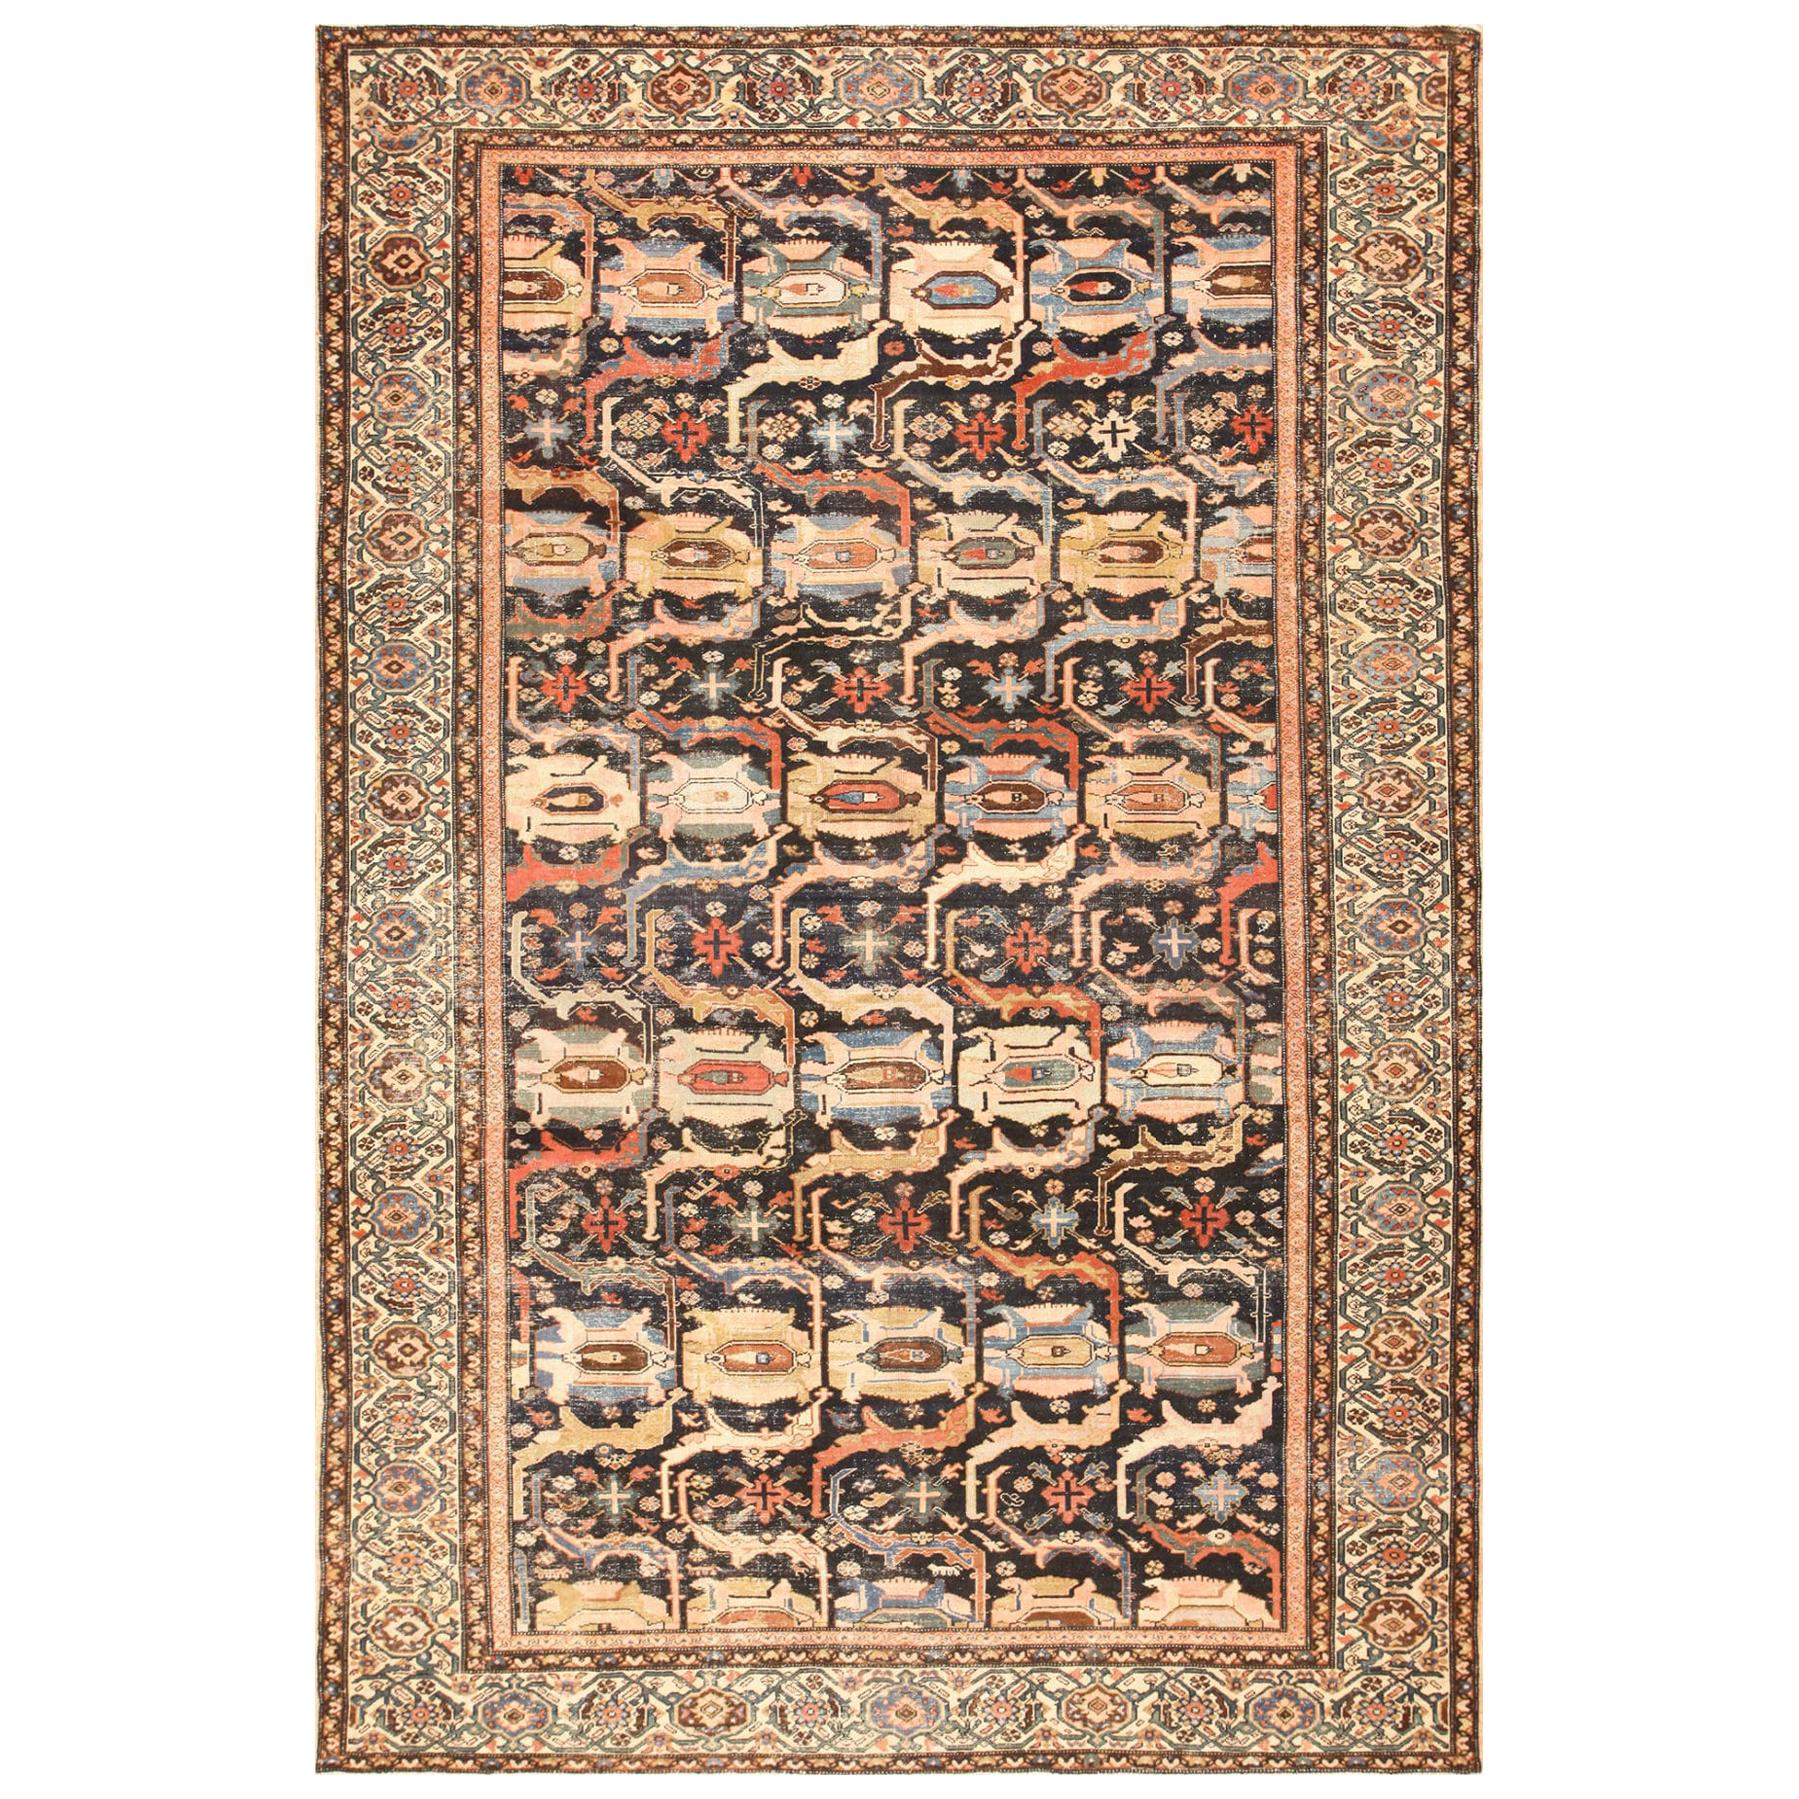 Nazmiyal Antique Shabby Chic Persian Malayer Rug. Size: 8 ft 6 in x 12 ft 9 in